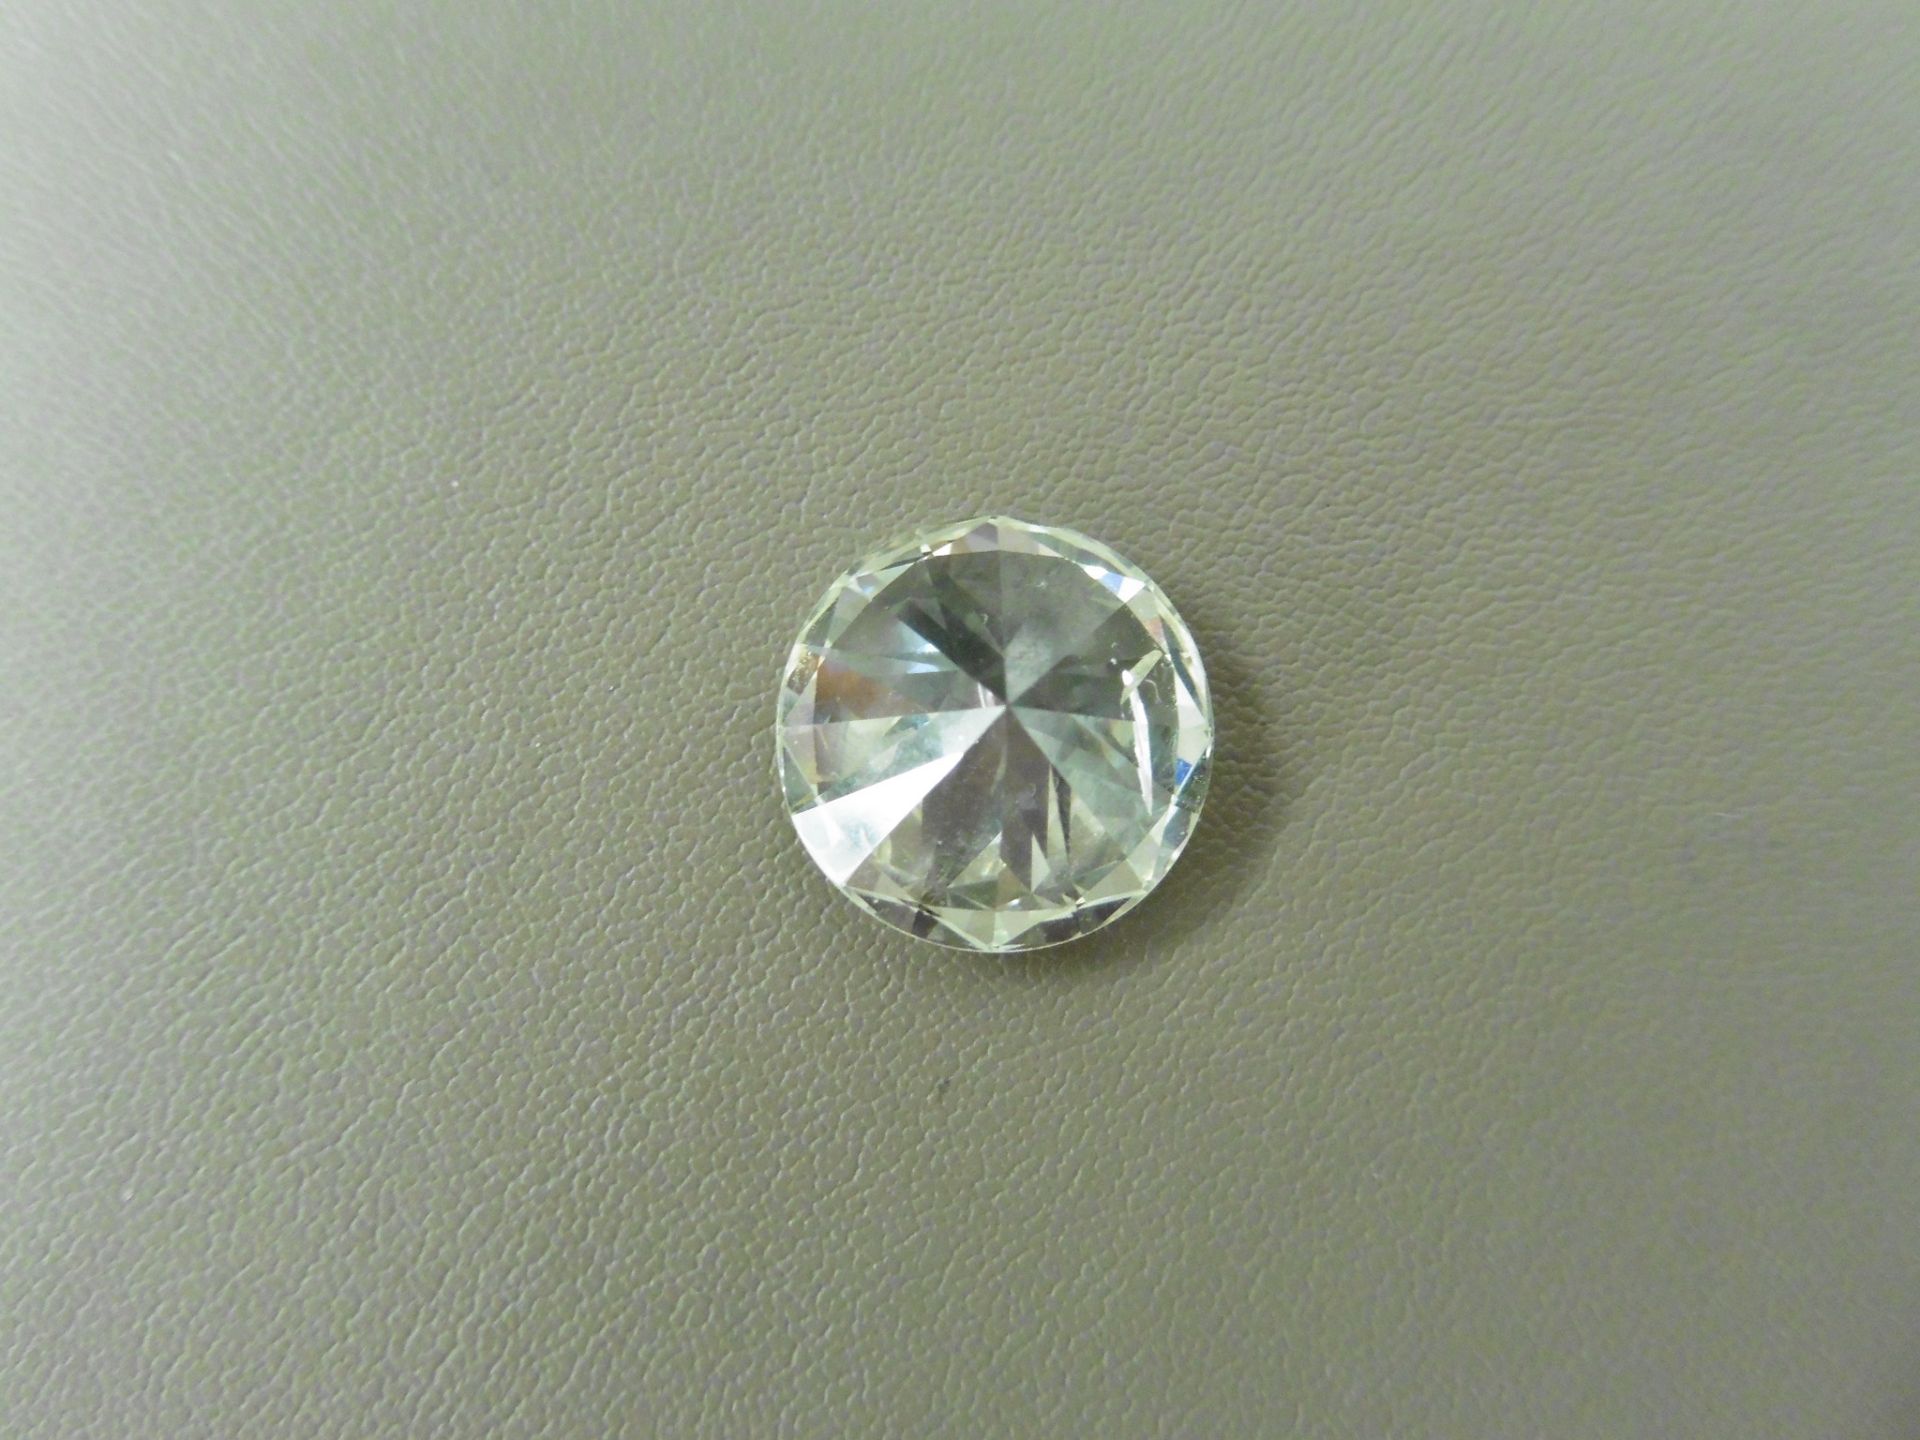 6.38ct natural loose brilliant cut diamond. K colourand I1 clarity. EGL certification. Valued at £ - Image 3 of 5